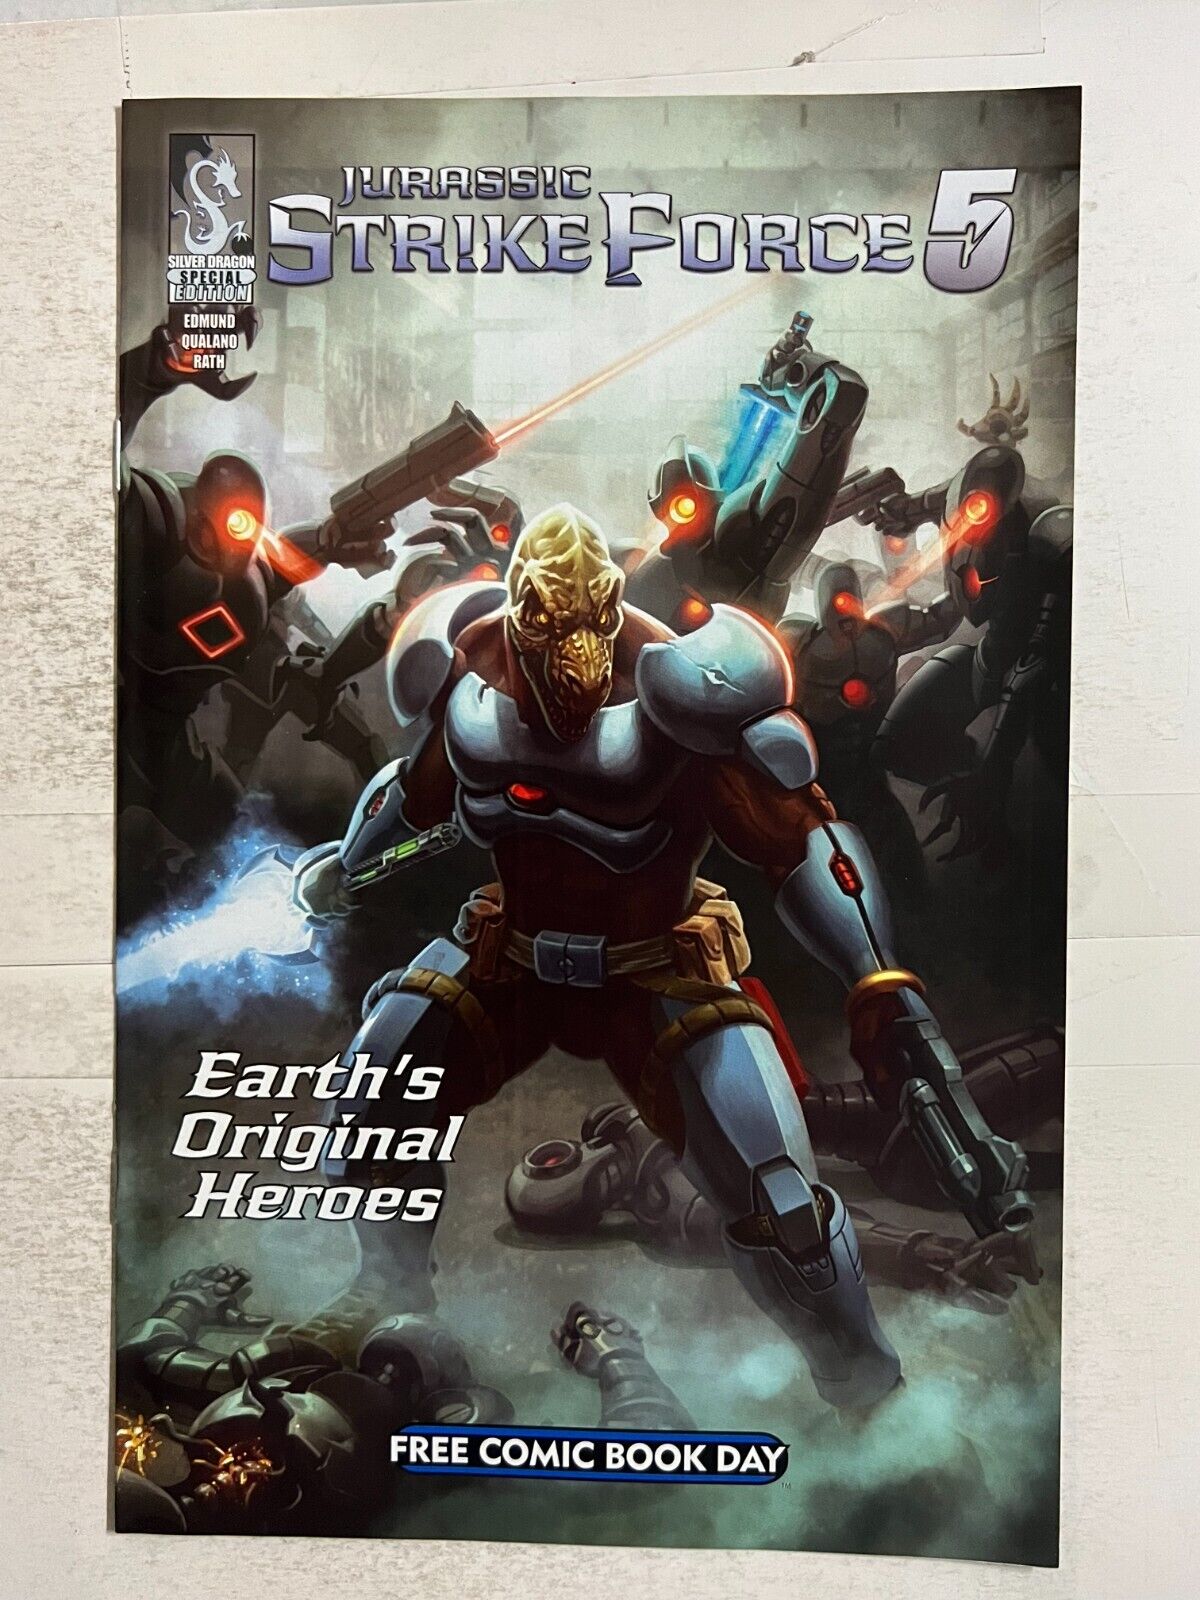 Jurassic Strike Force 5 #1 Free Comic Book Day Silver Dragon 2012 | Combined Shi